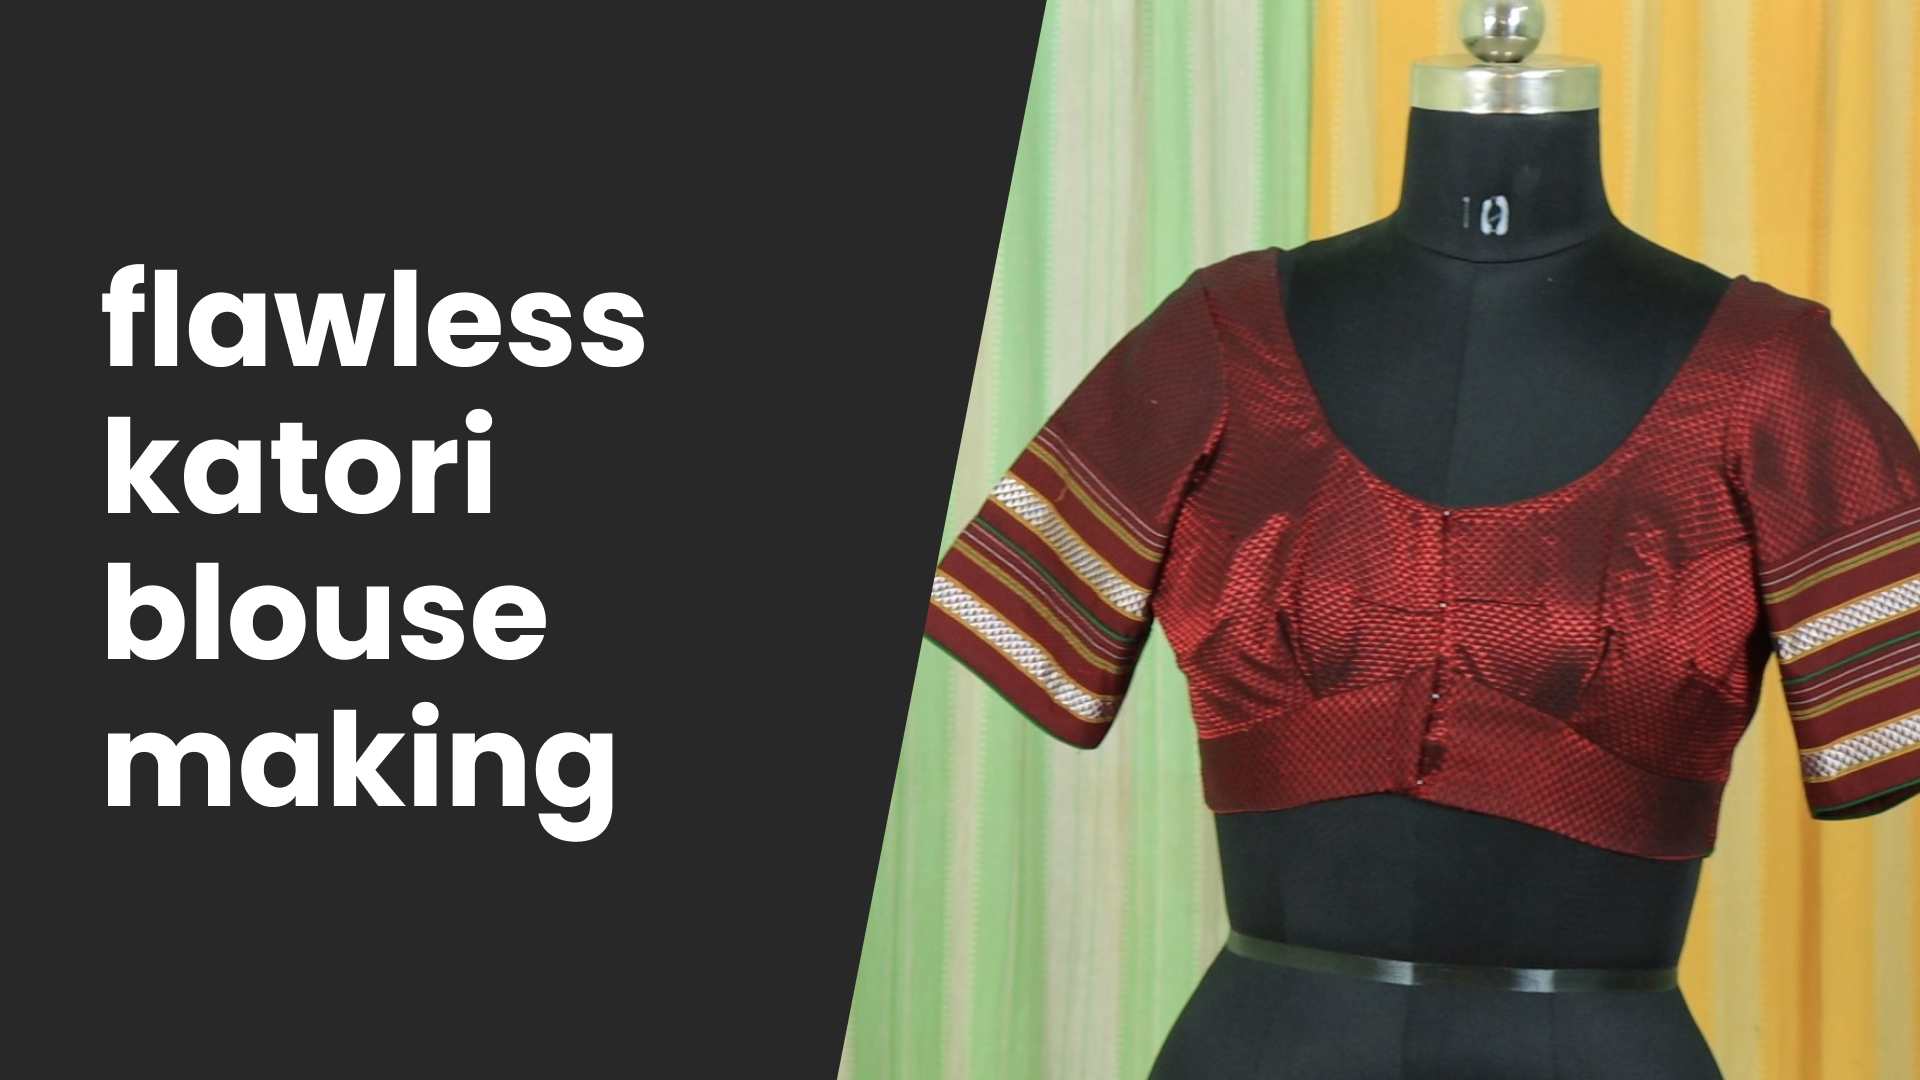 Course Trailer: Learn to Stitch a Semi-Katori Blouse. Watch to know more.